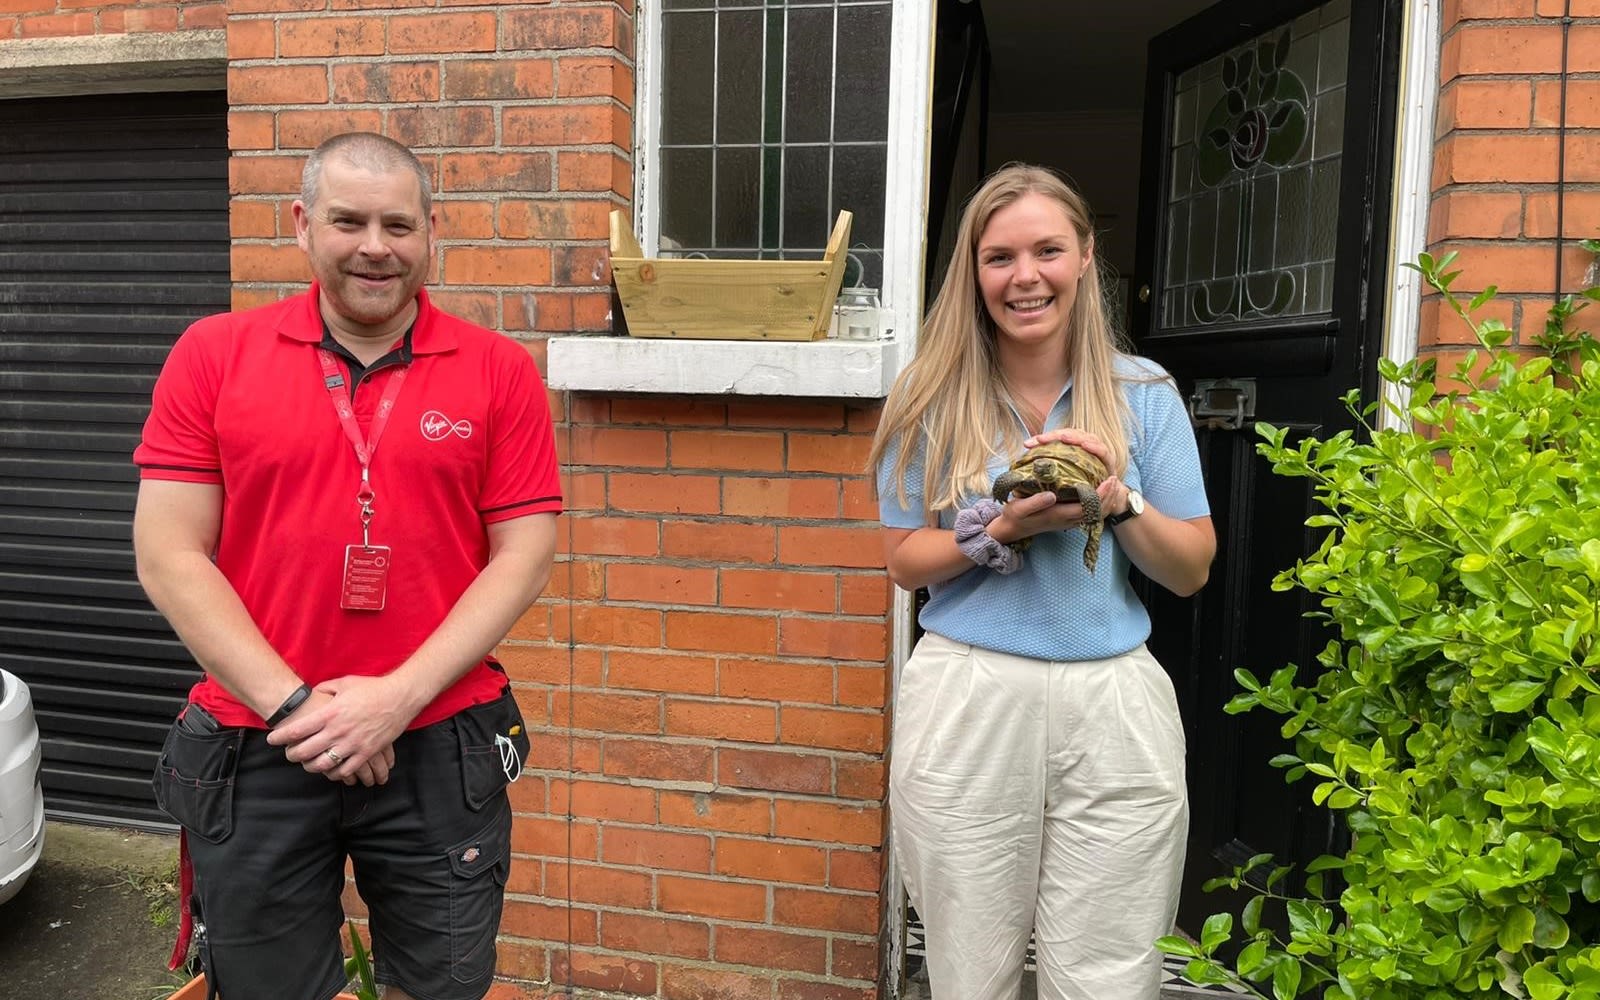 Hermes the tortoise with his owner Cedar and a Virgin Media engineer